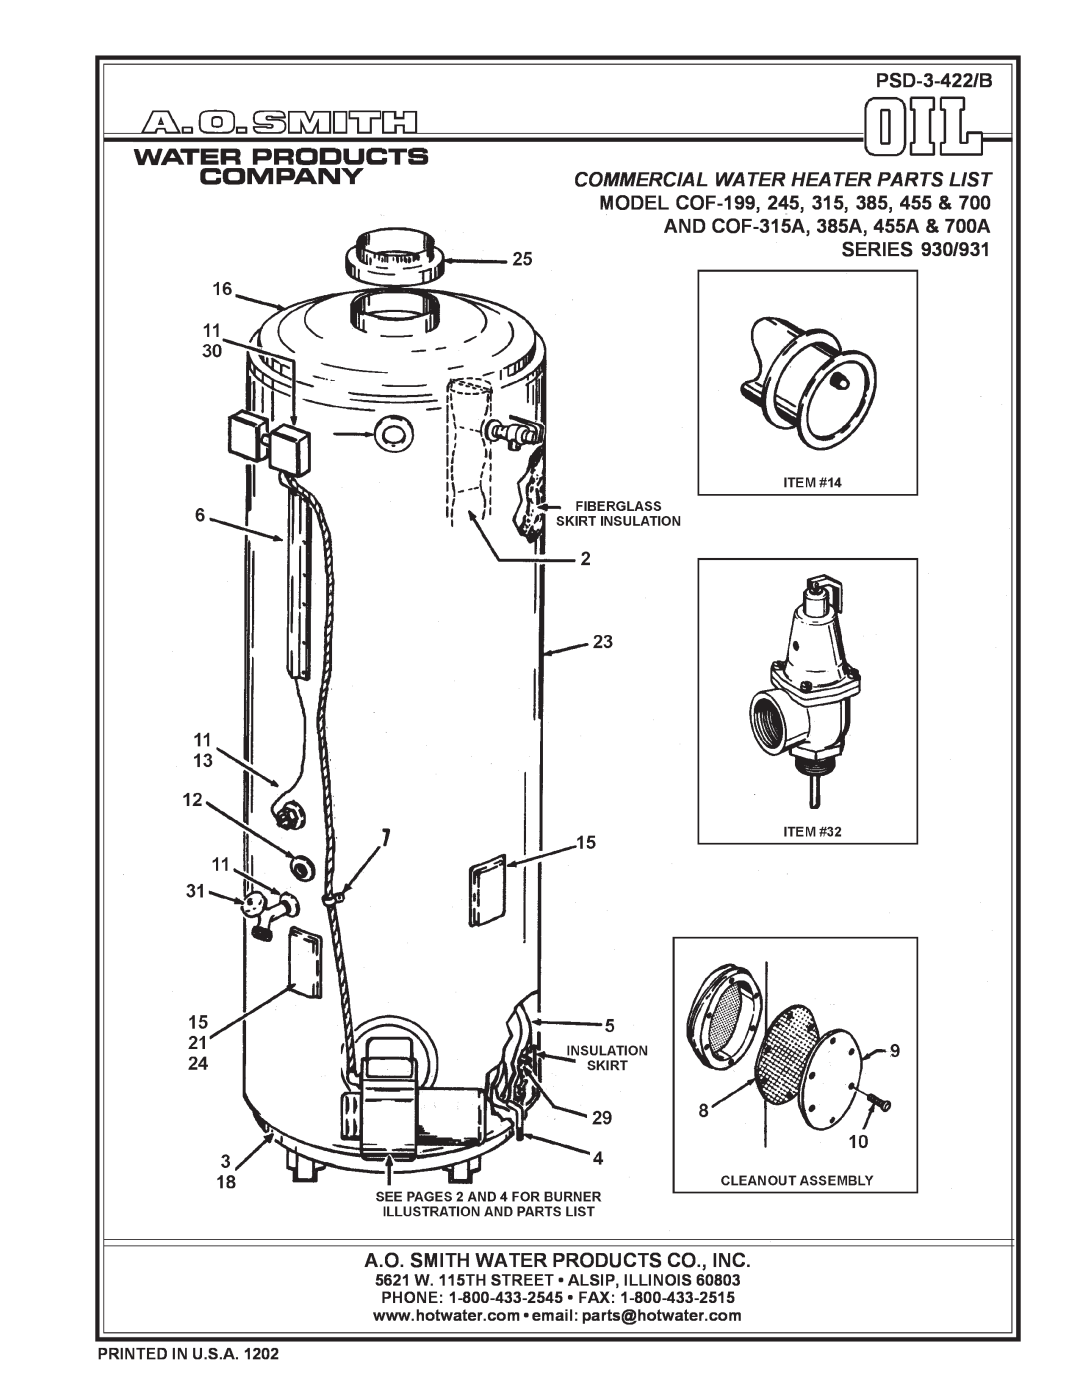 A.O. Smith 930 Series, 931 Series, COF-700A manual Printed In U.S.A, PSD-3-422/B, Commercial Water Heater Parts List 